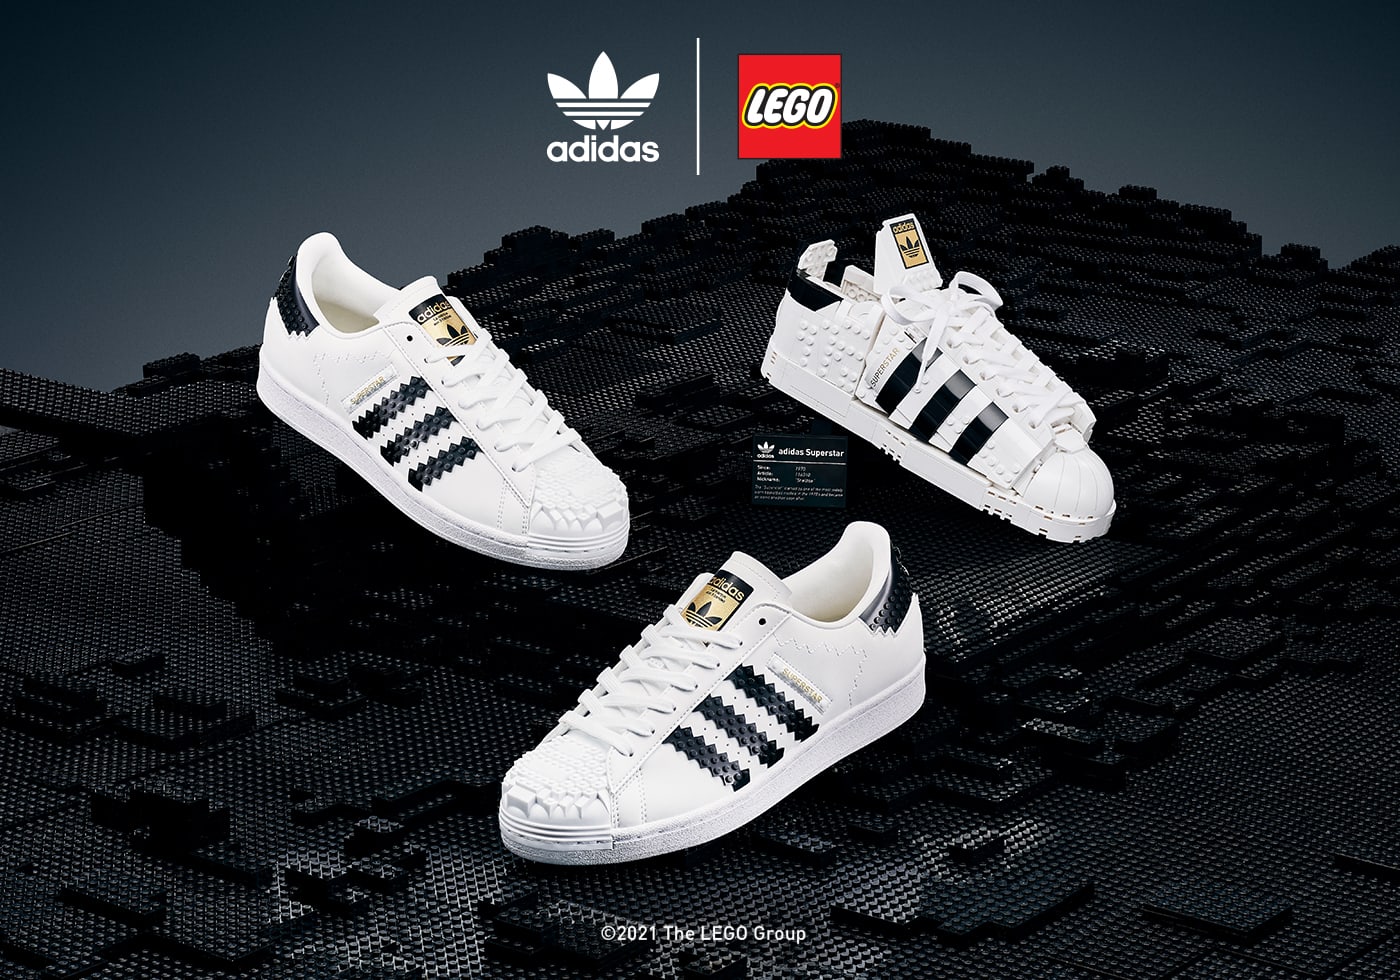 Adidas X Lego Clothing Shoes Members Get 33 Off With Code Allset